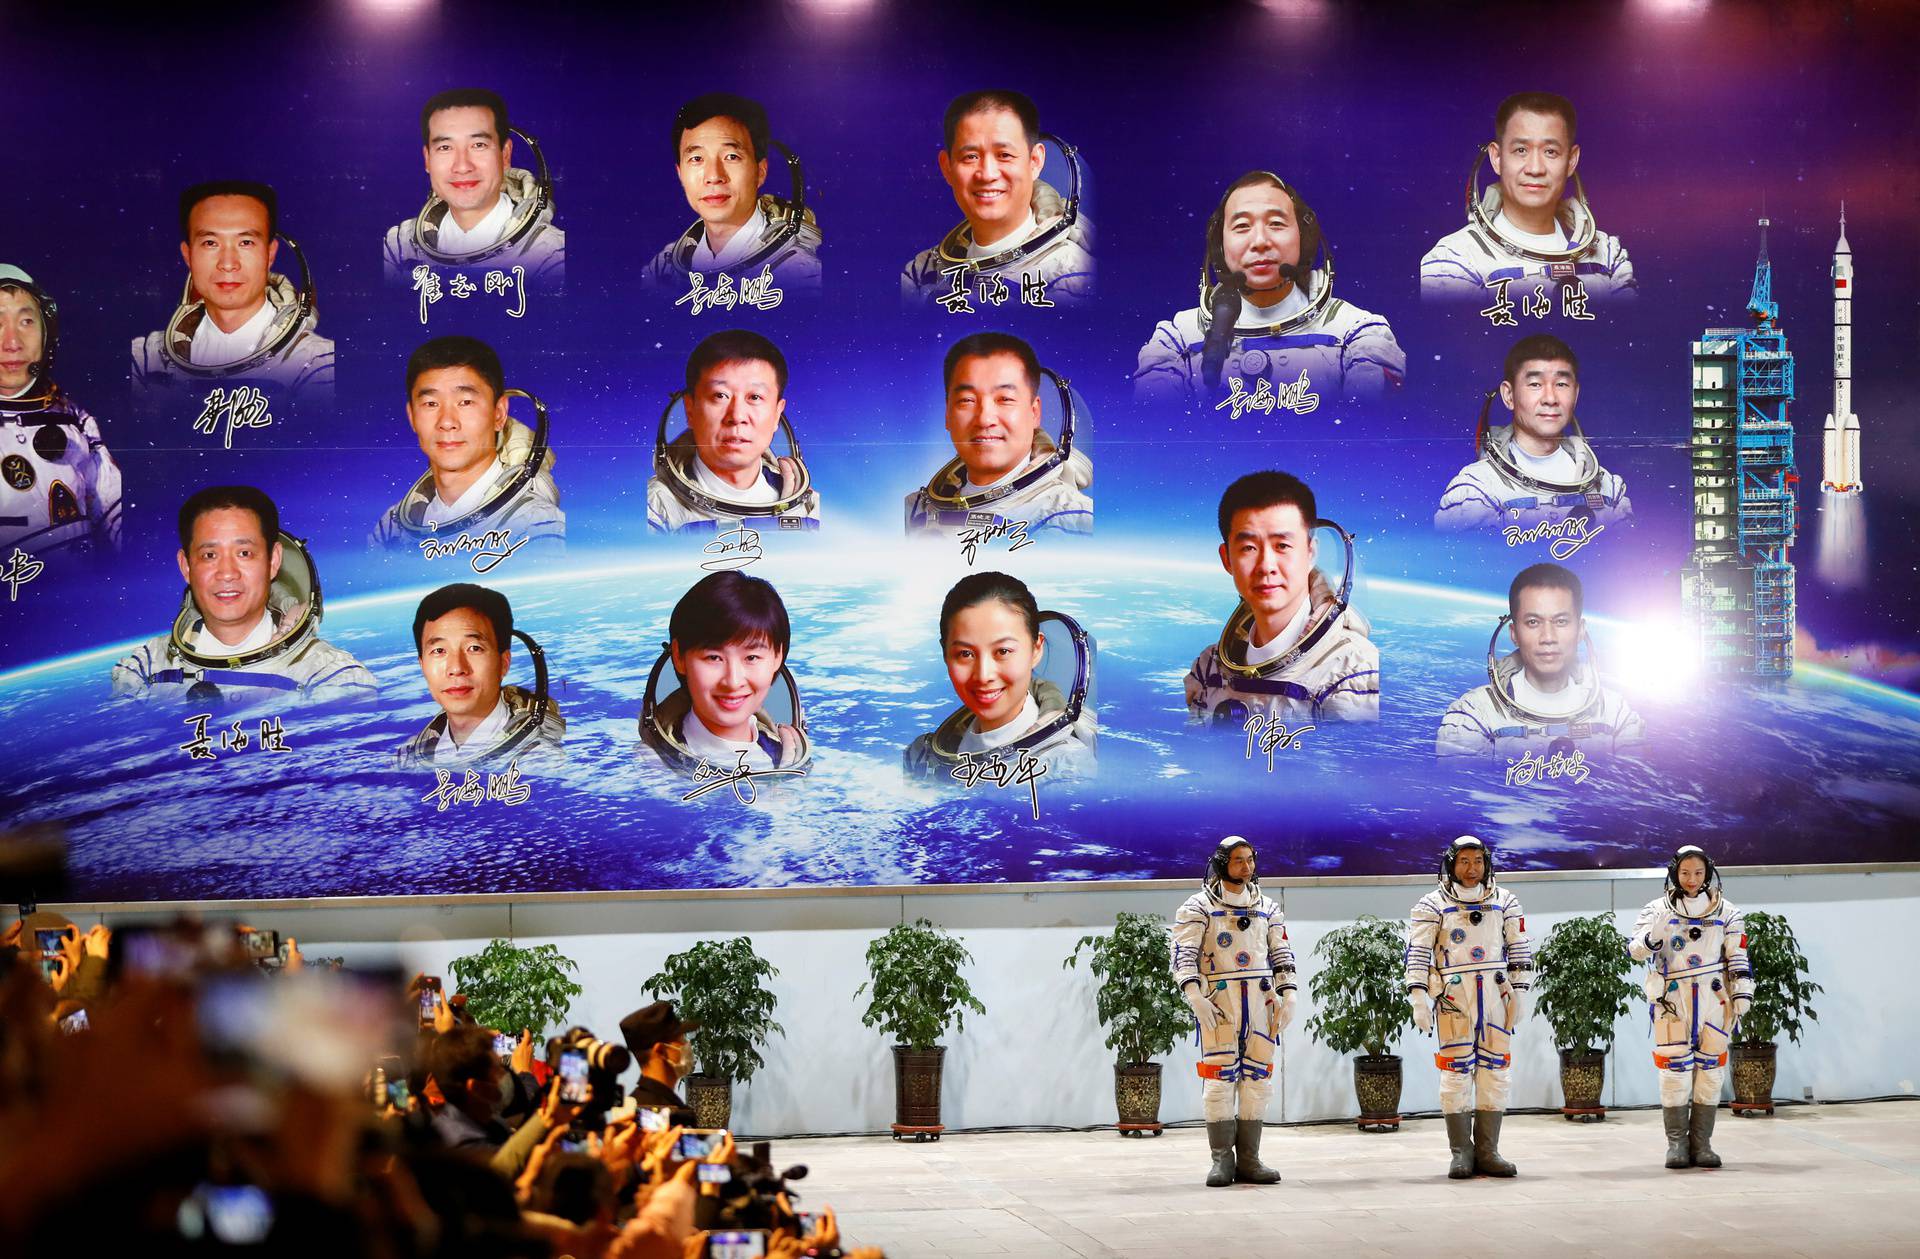 News conference before the launch of Long March-2F Y13 rocket, near Jiuquan